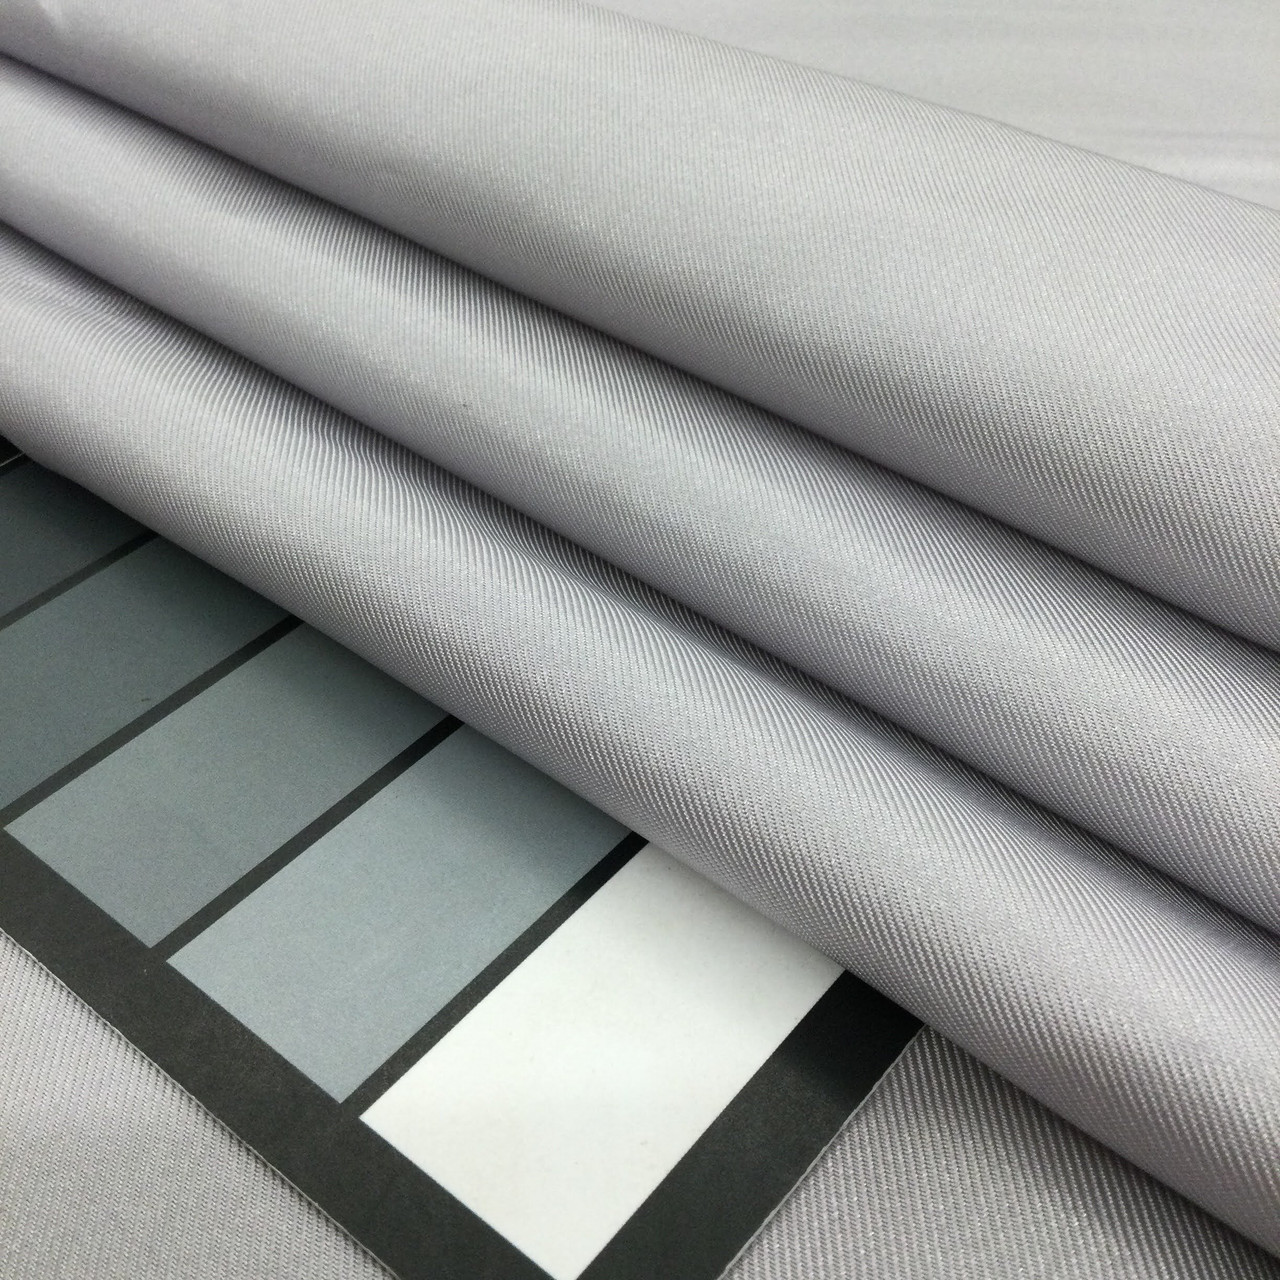 Silver Gray Diagonal Texture Lining Fabric, Midweight, 100% Polyester, Clothing and Apparel, 60 inch Wide